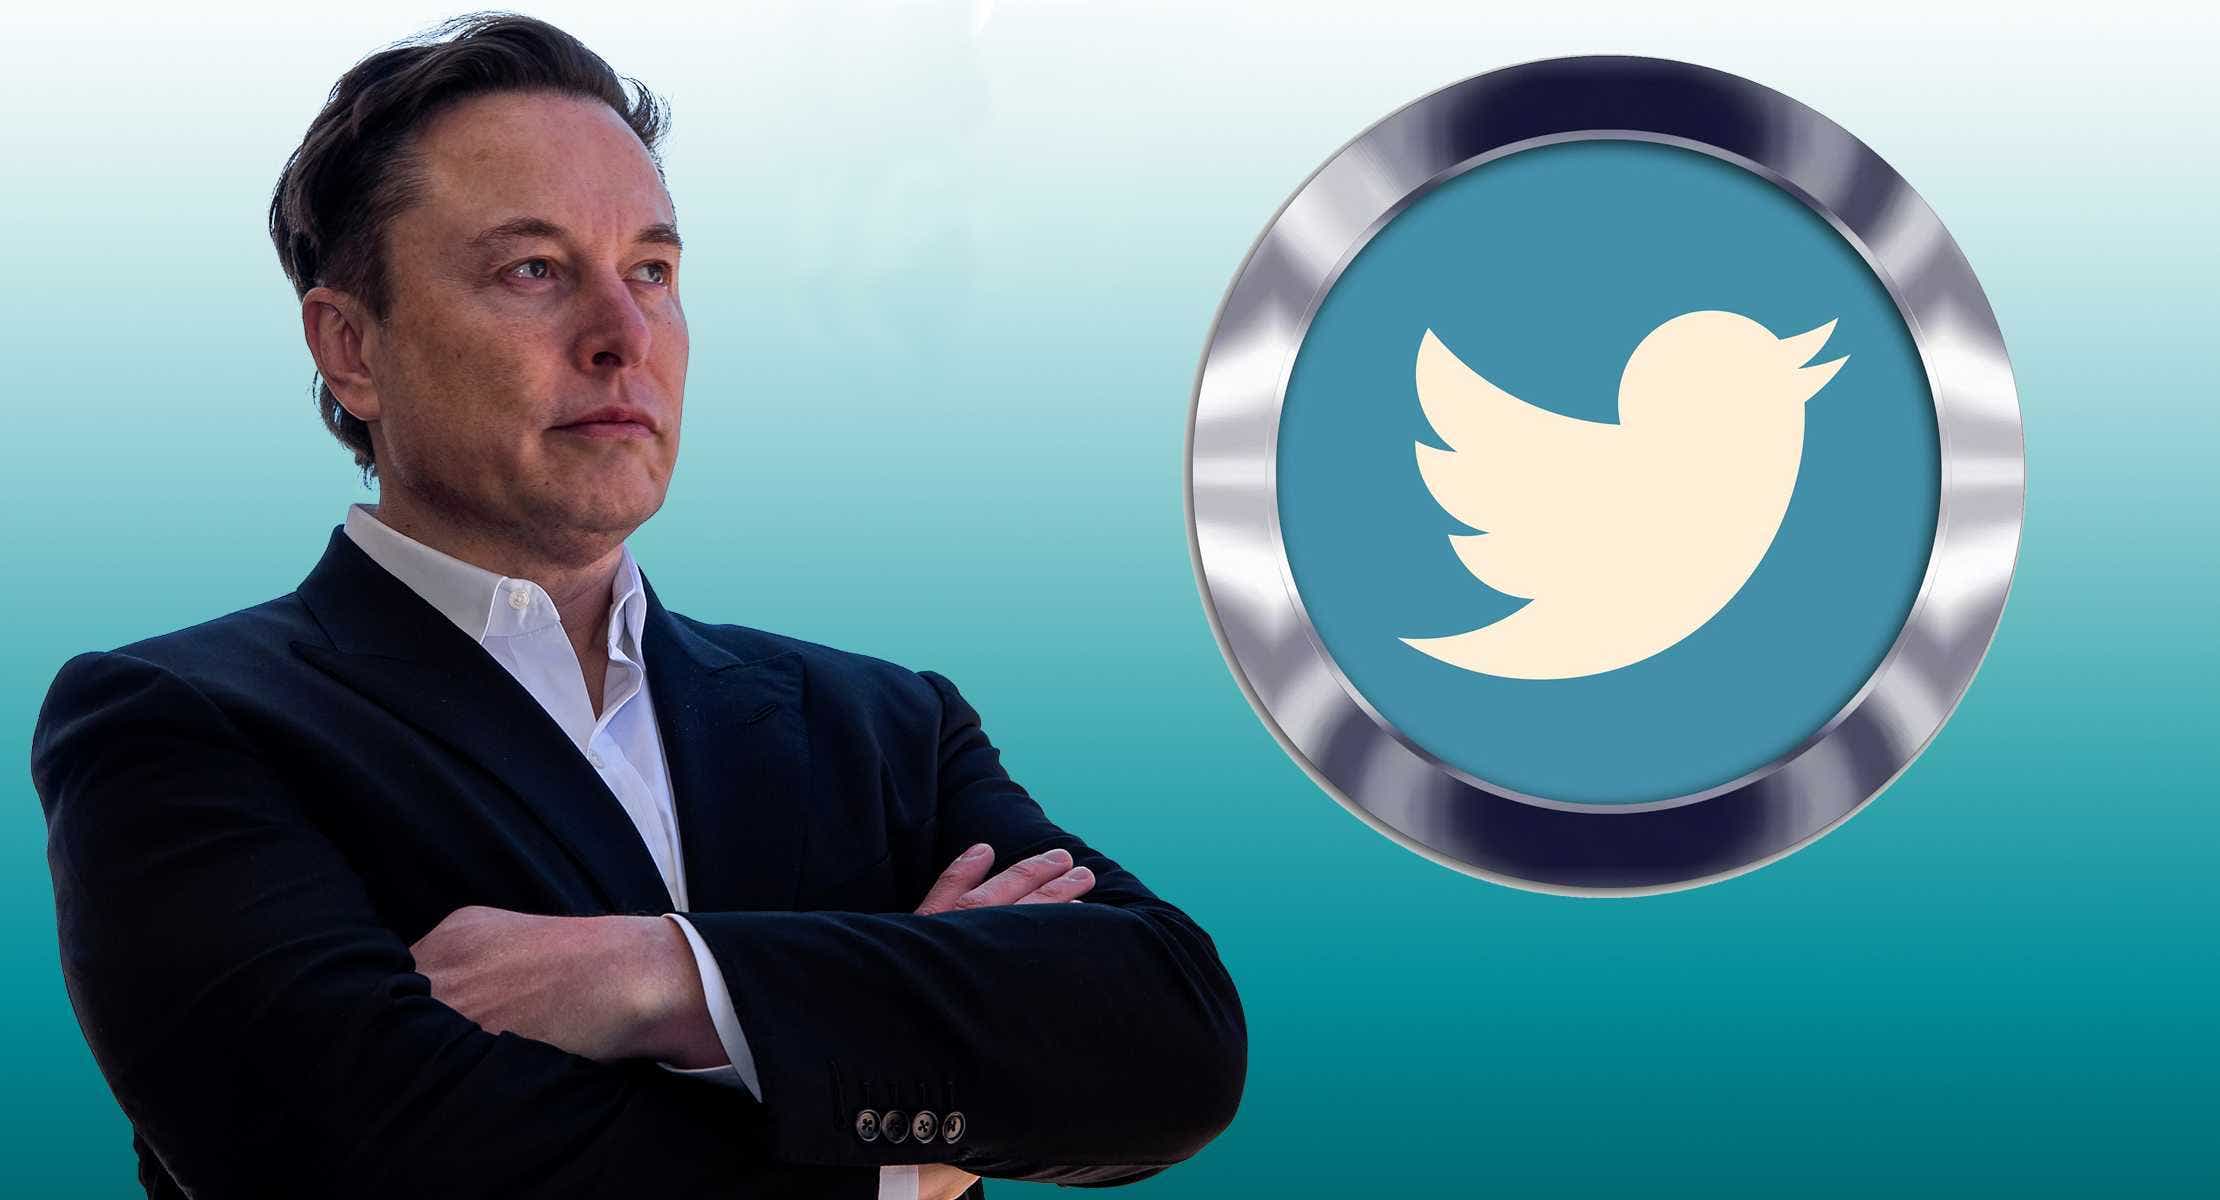 Here's When Elon Musk Heads To Court To Discuss Pending $44B Twitter Deal